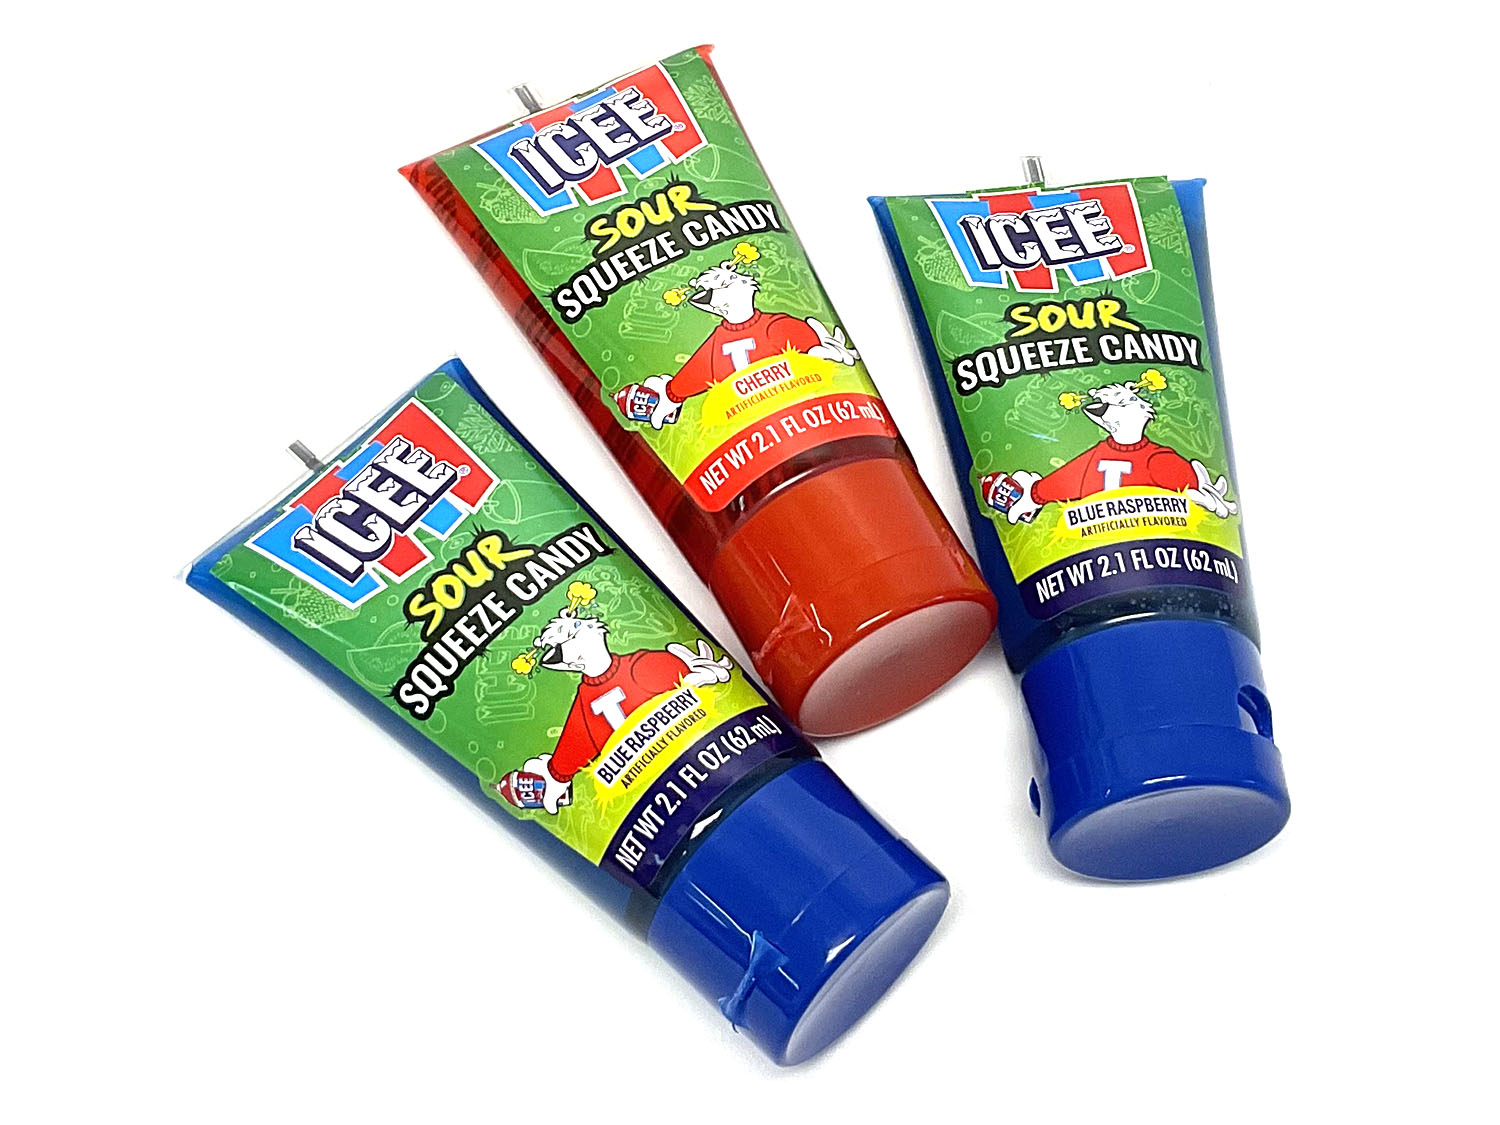 ICEE Sour Squeeze Candy - 2.1 oz tube